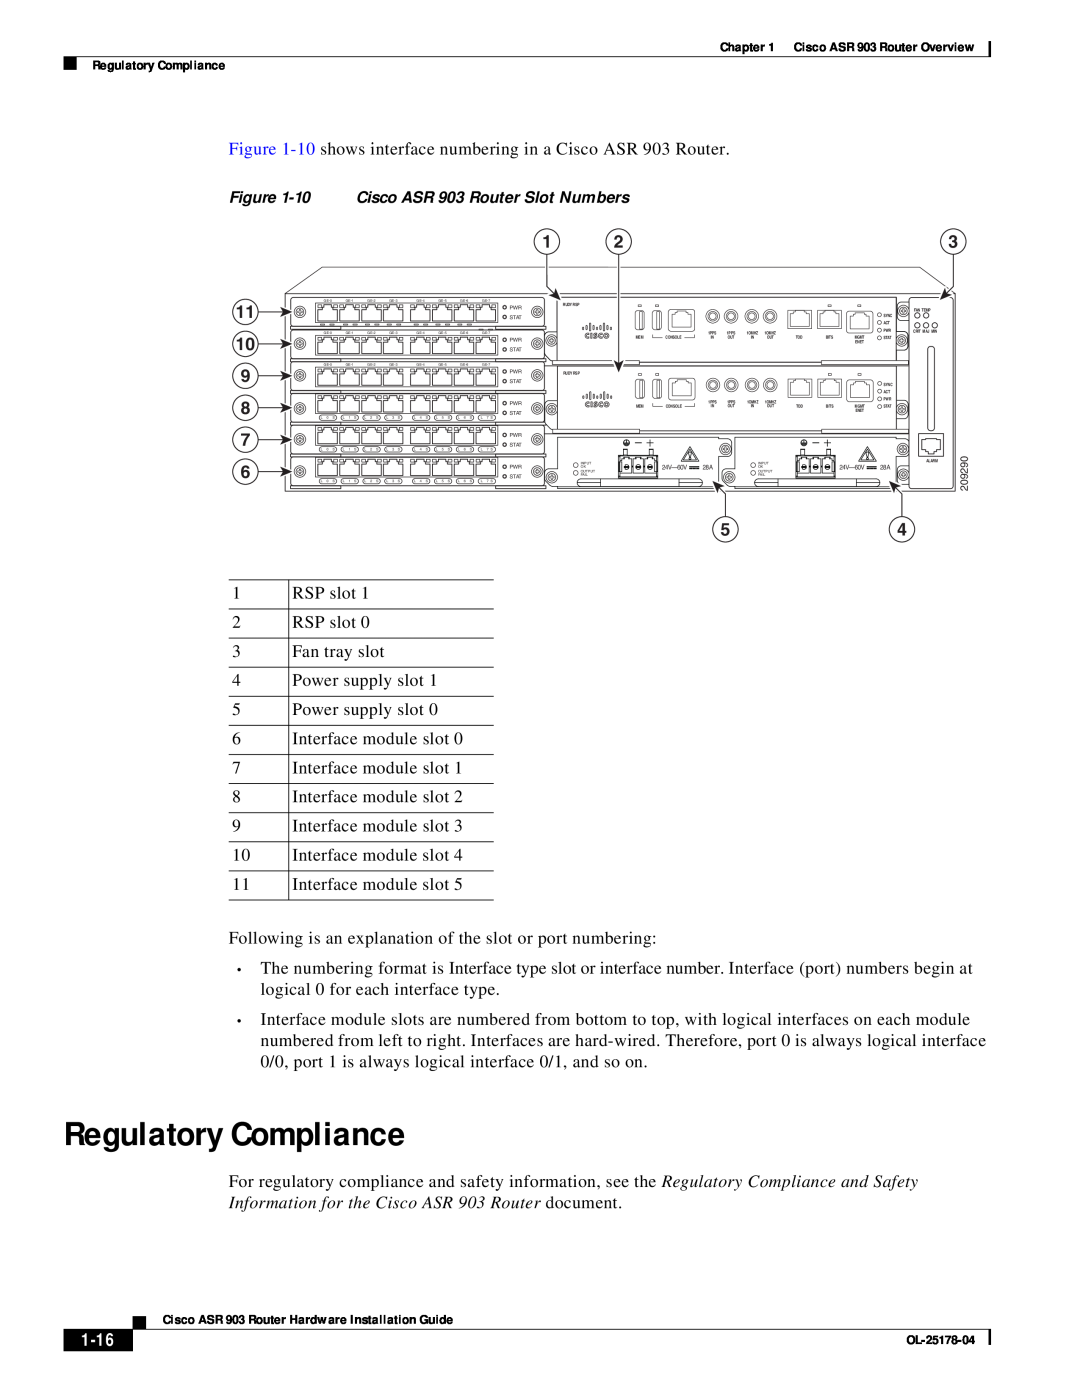 Cisco Systems manual Regulatory Compliance, 1-16, Information for the Cisco ASR 903 Router document 